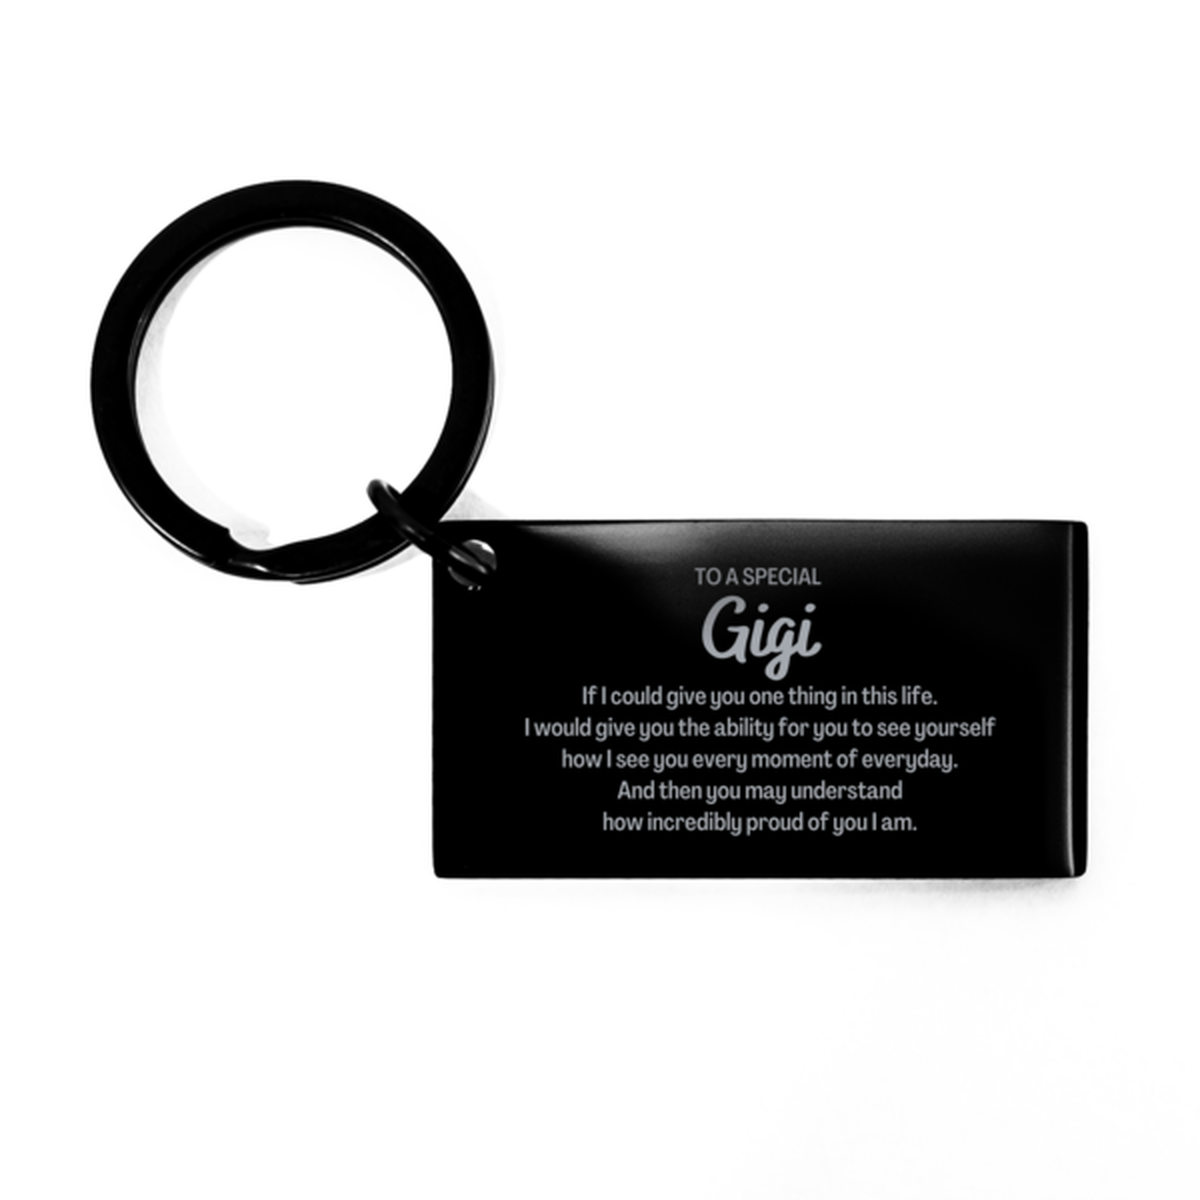 To My Gigi Keychain, Gifts For Gigi Engraved, Inspirational Gifts for Christmas Birthday, Epic Gifts for Gigi To A Special Gigi how incredibly proud of you I am